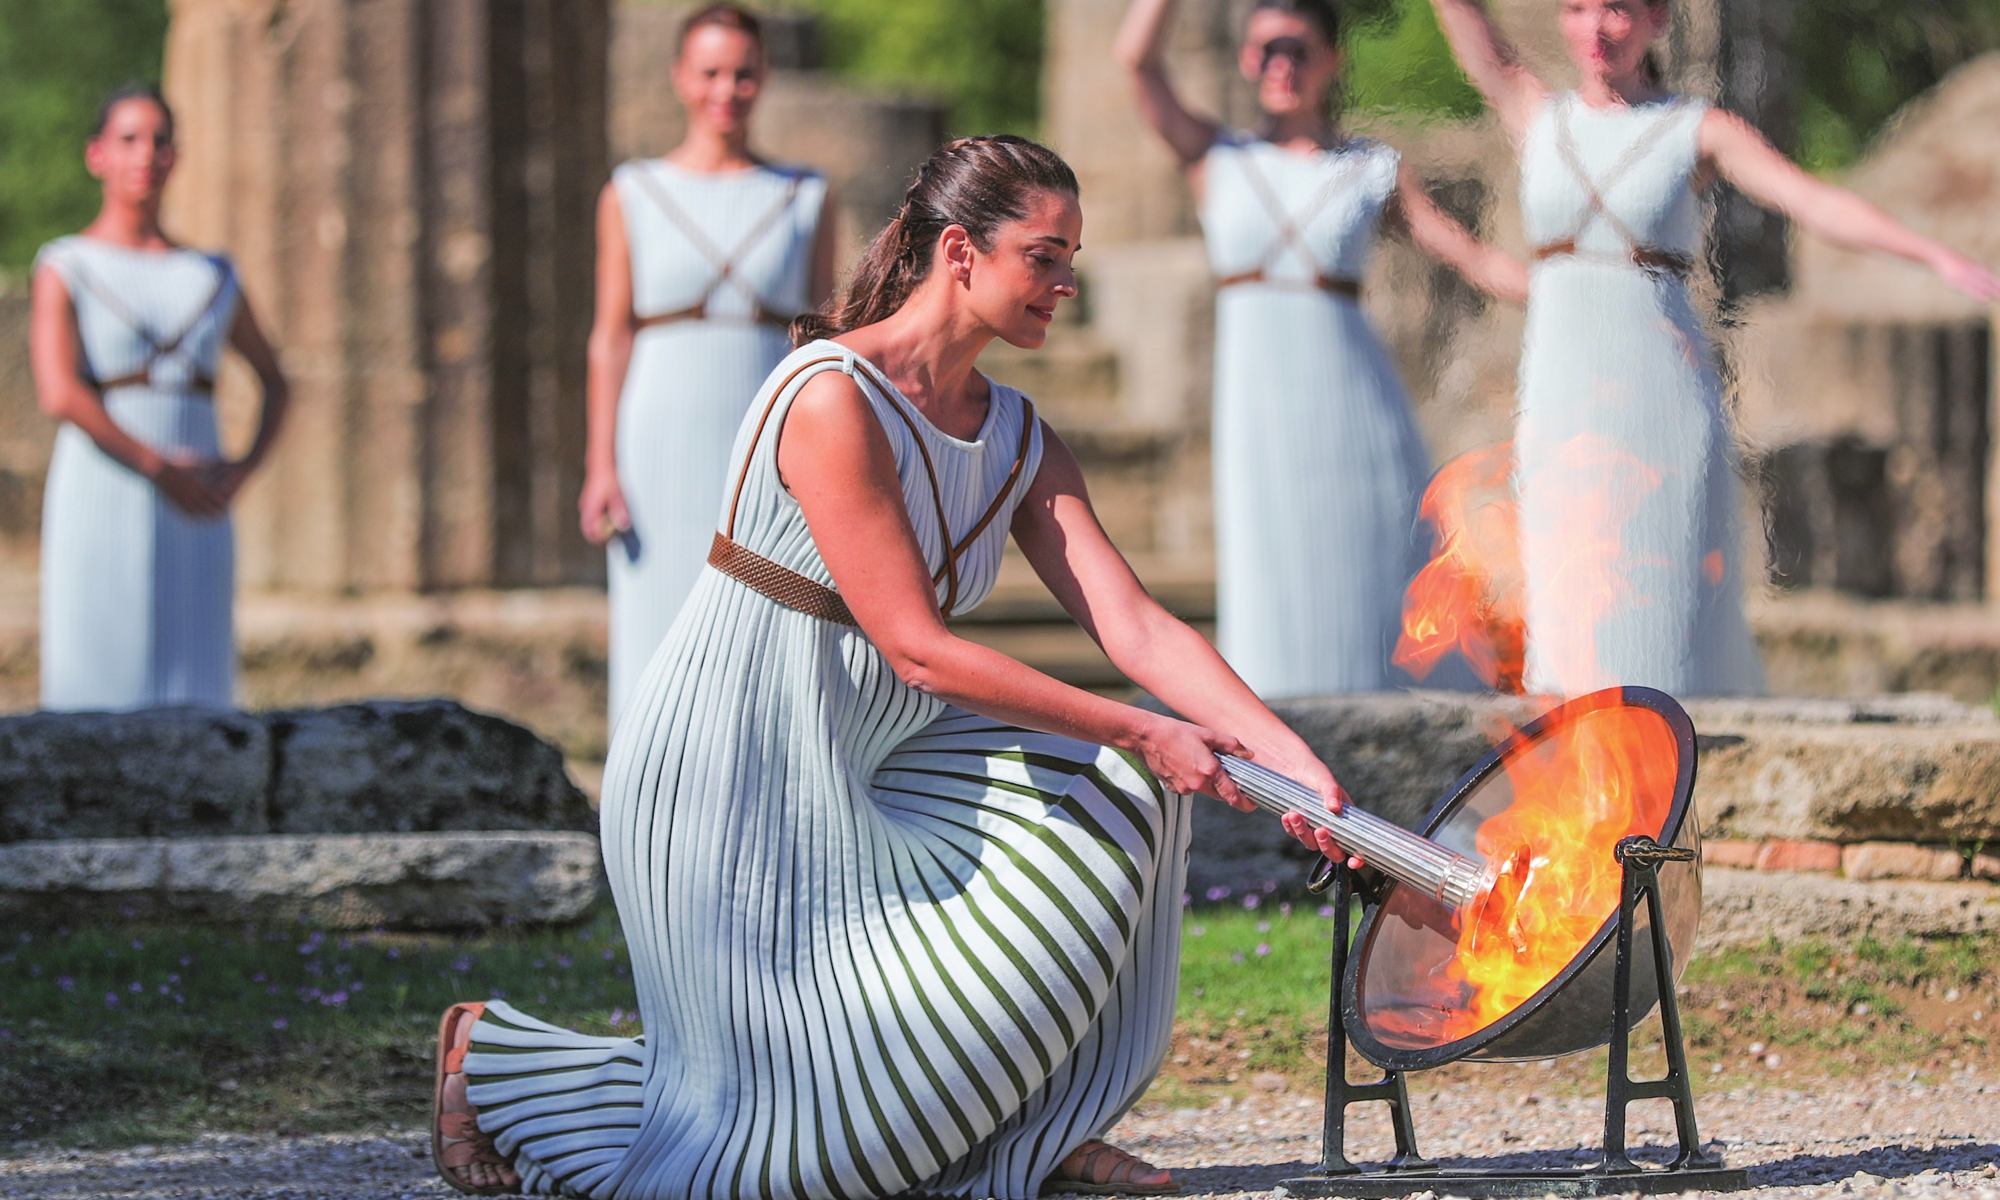 Greek actress Xanthi Georgiou (R, front), playing the role of an ancient Greek High Priestess, lights a cauldron with the Olympic Flame during the Olympic flame lighting ceremony for the Beijing 2022 Winter Olympic Games, in ancient Olympia, Greece, on Monday. Photo: Xinhua